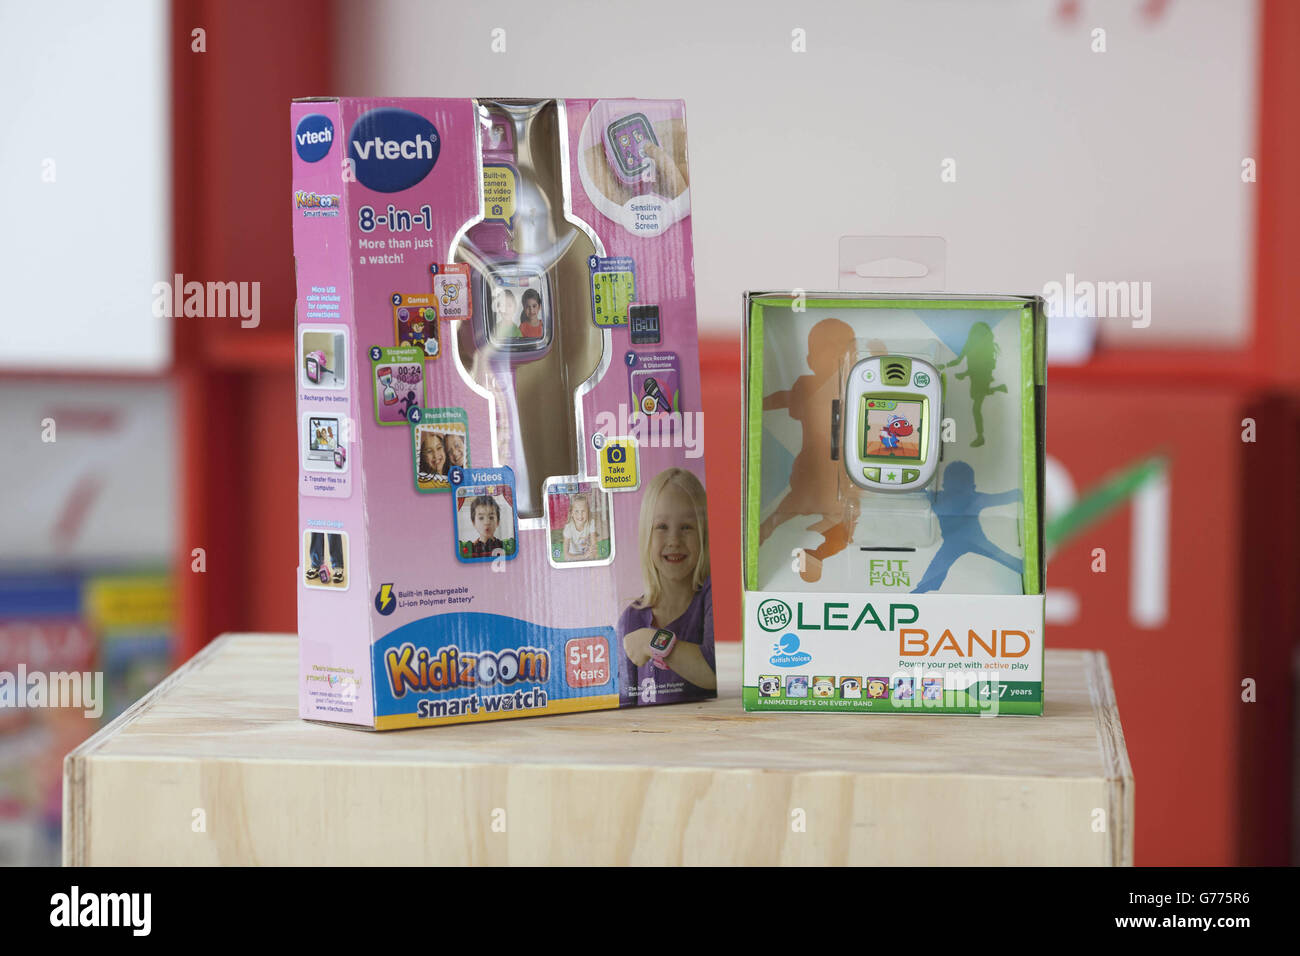 VTech Kiddizoom Smart Watch and Leapfrog Leap Band Green on display during the Argos Christmas Preview in London. Stock Photo